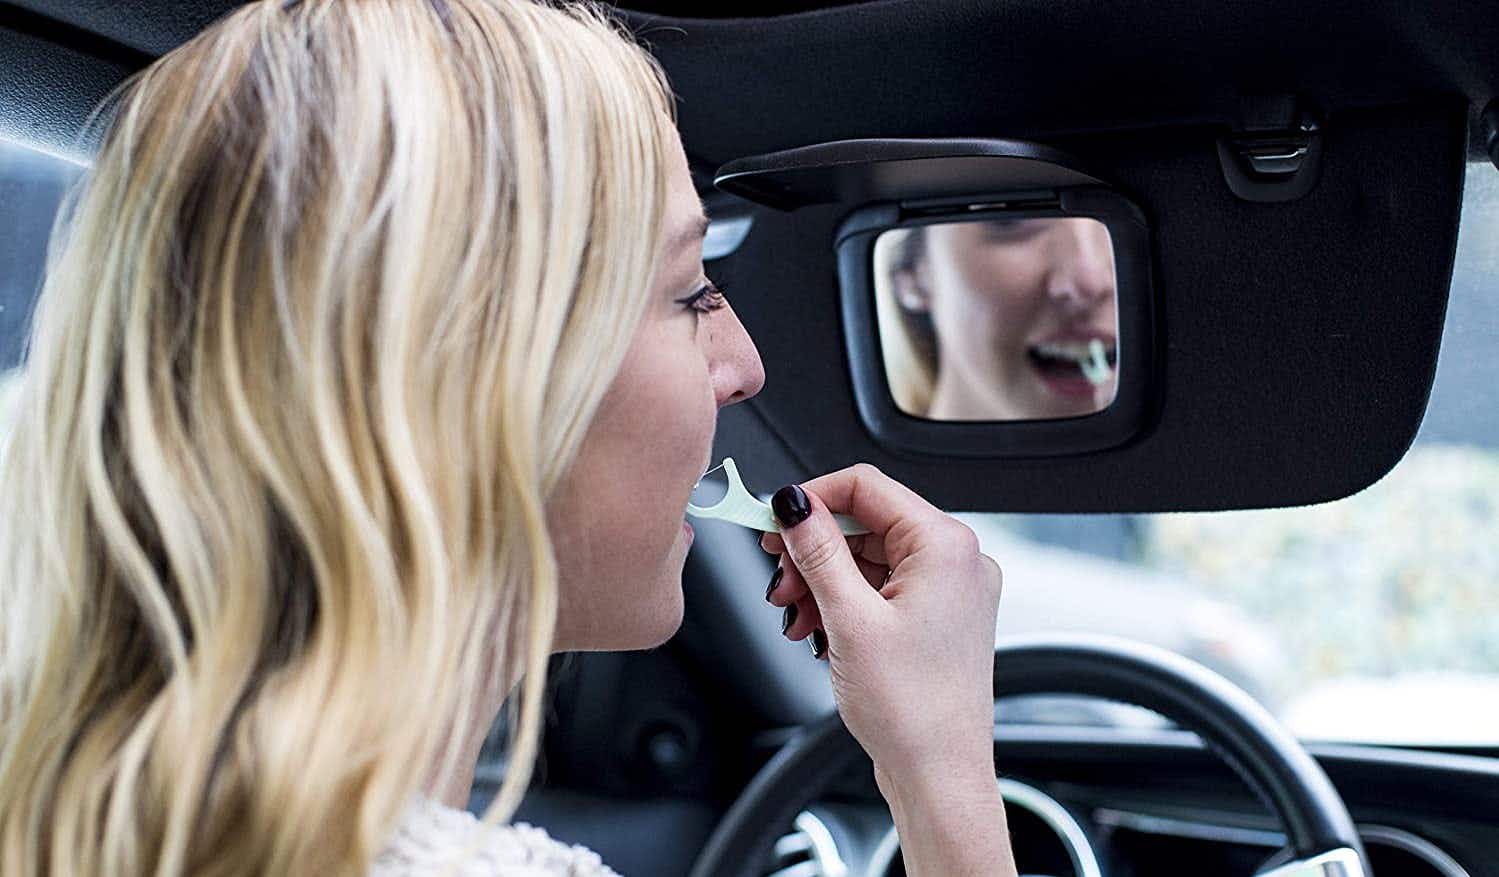 A woman using a Plackers dental floss pick in her car.